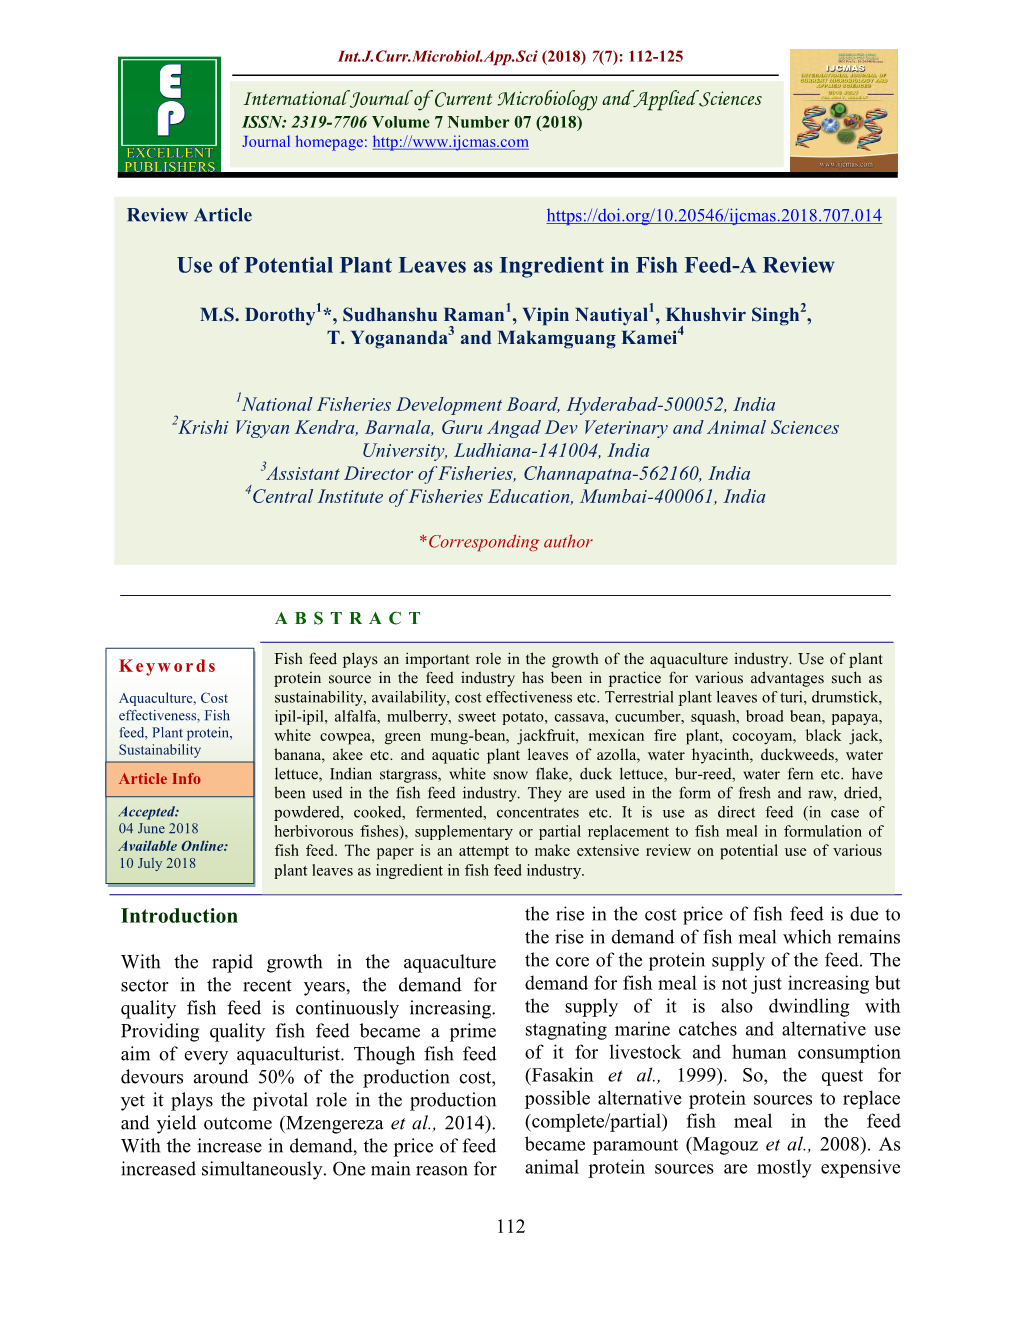 Use of Potential Plant Leaves As Ingredient in Fish Feed-A Review